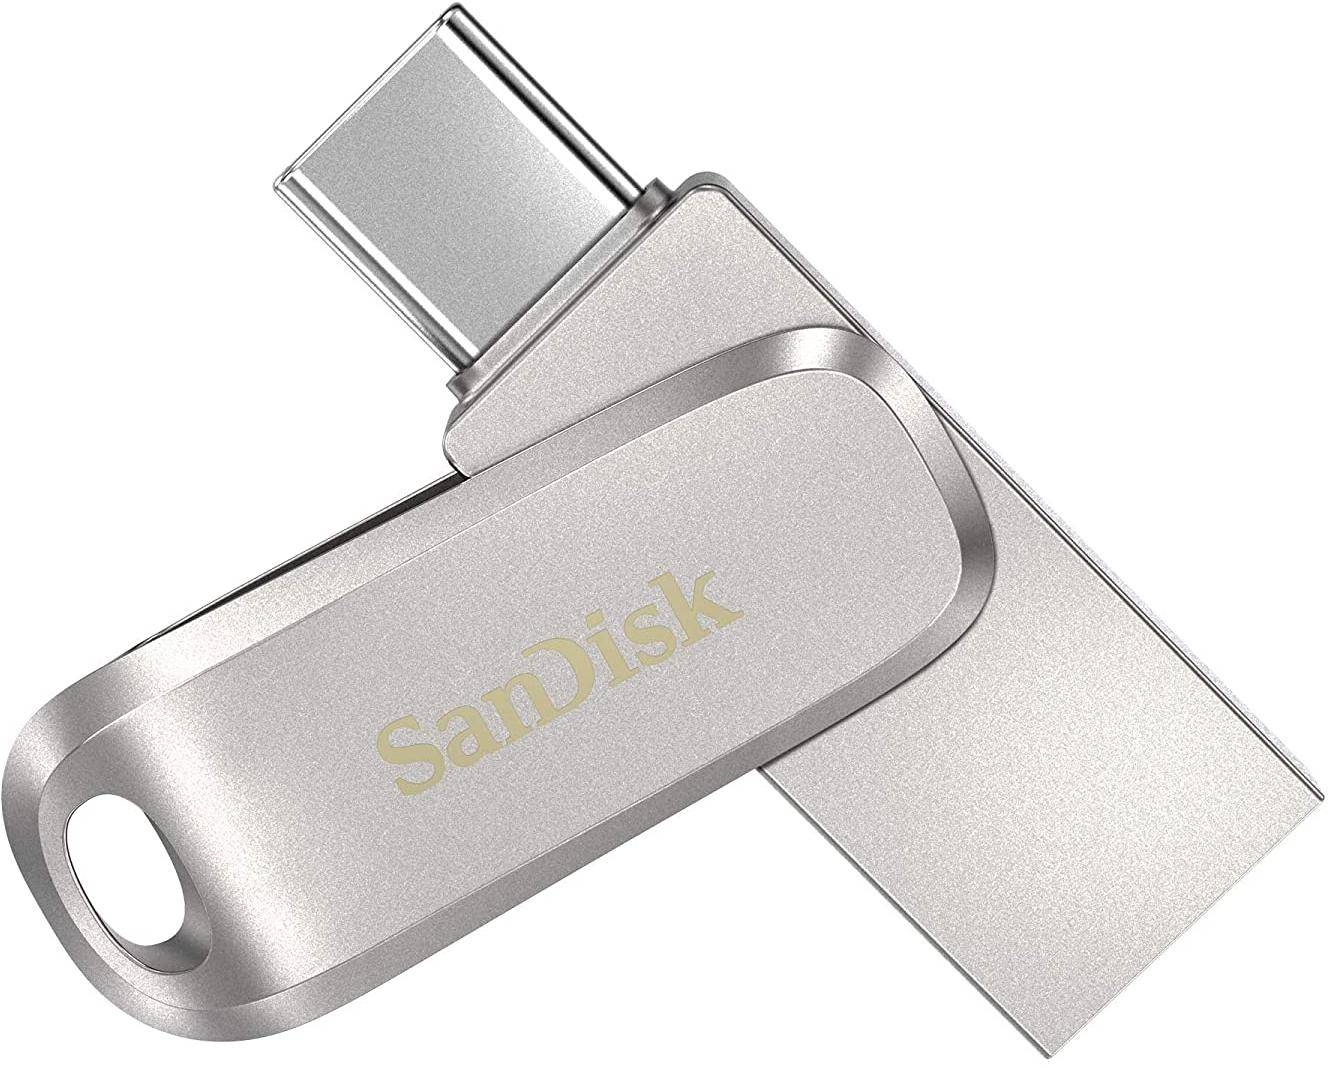 SanDisk Ultra Dual Drive Luxe 32GB Type C Flash Drive  zoom image